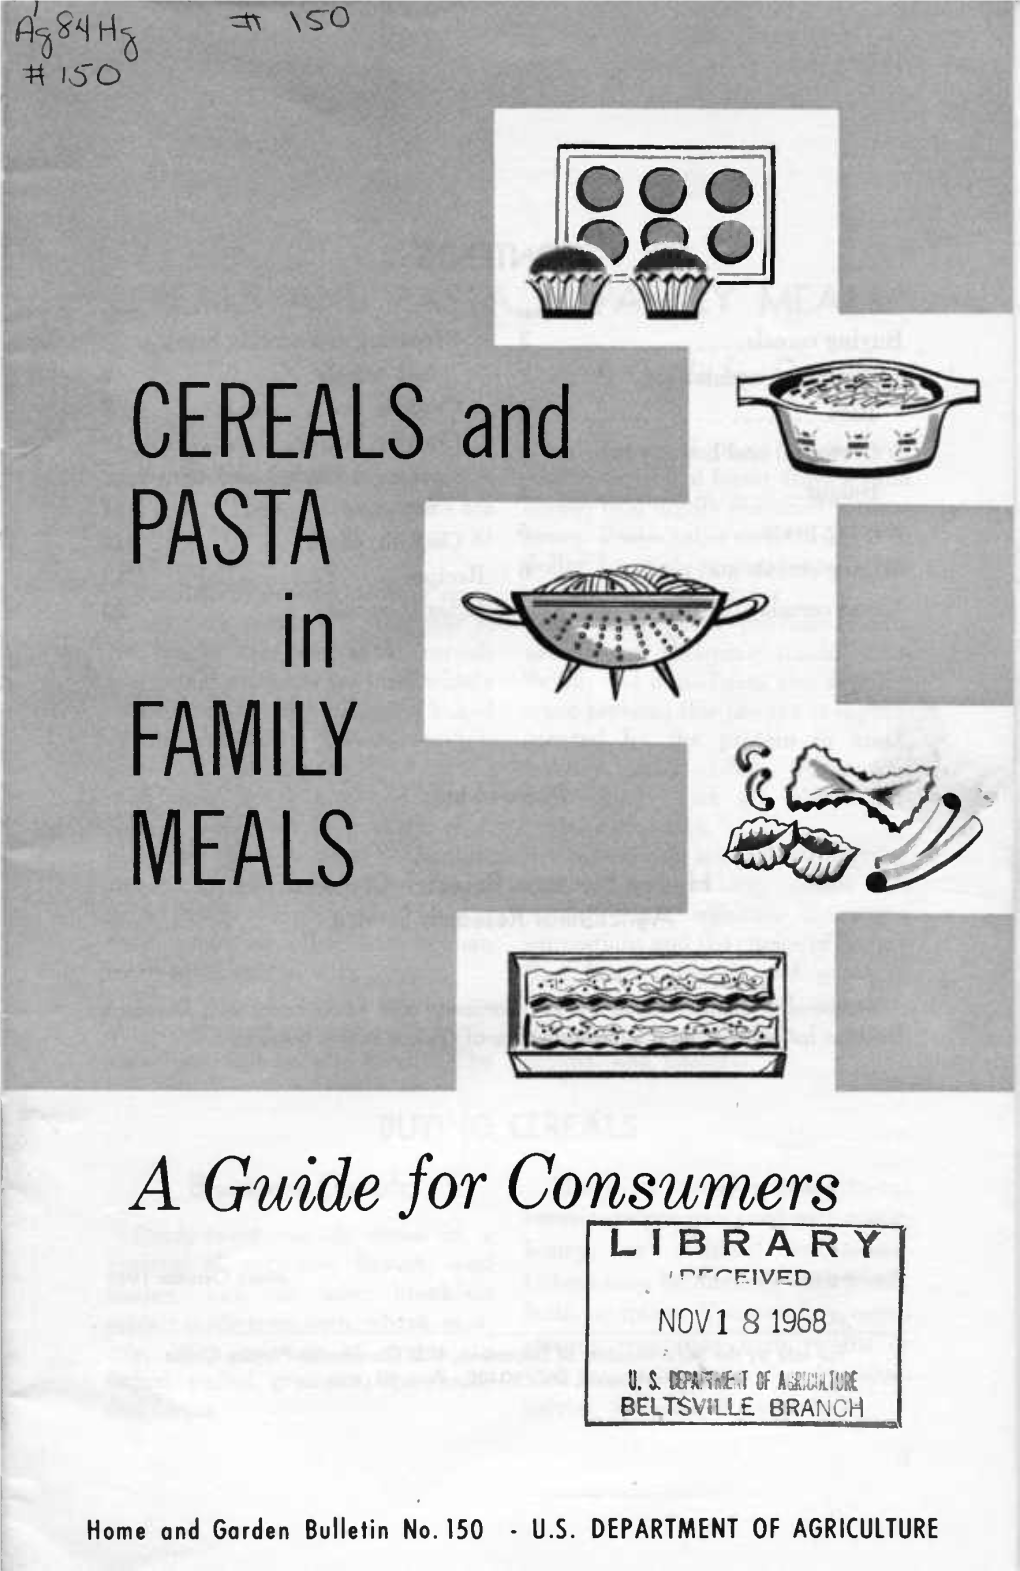 CEREALS and PASTA FAMILY MEALS